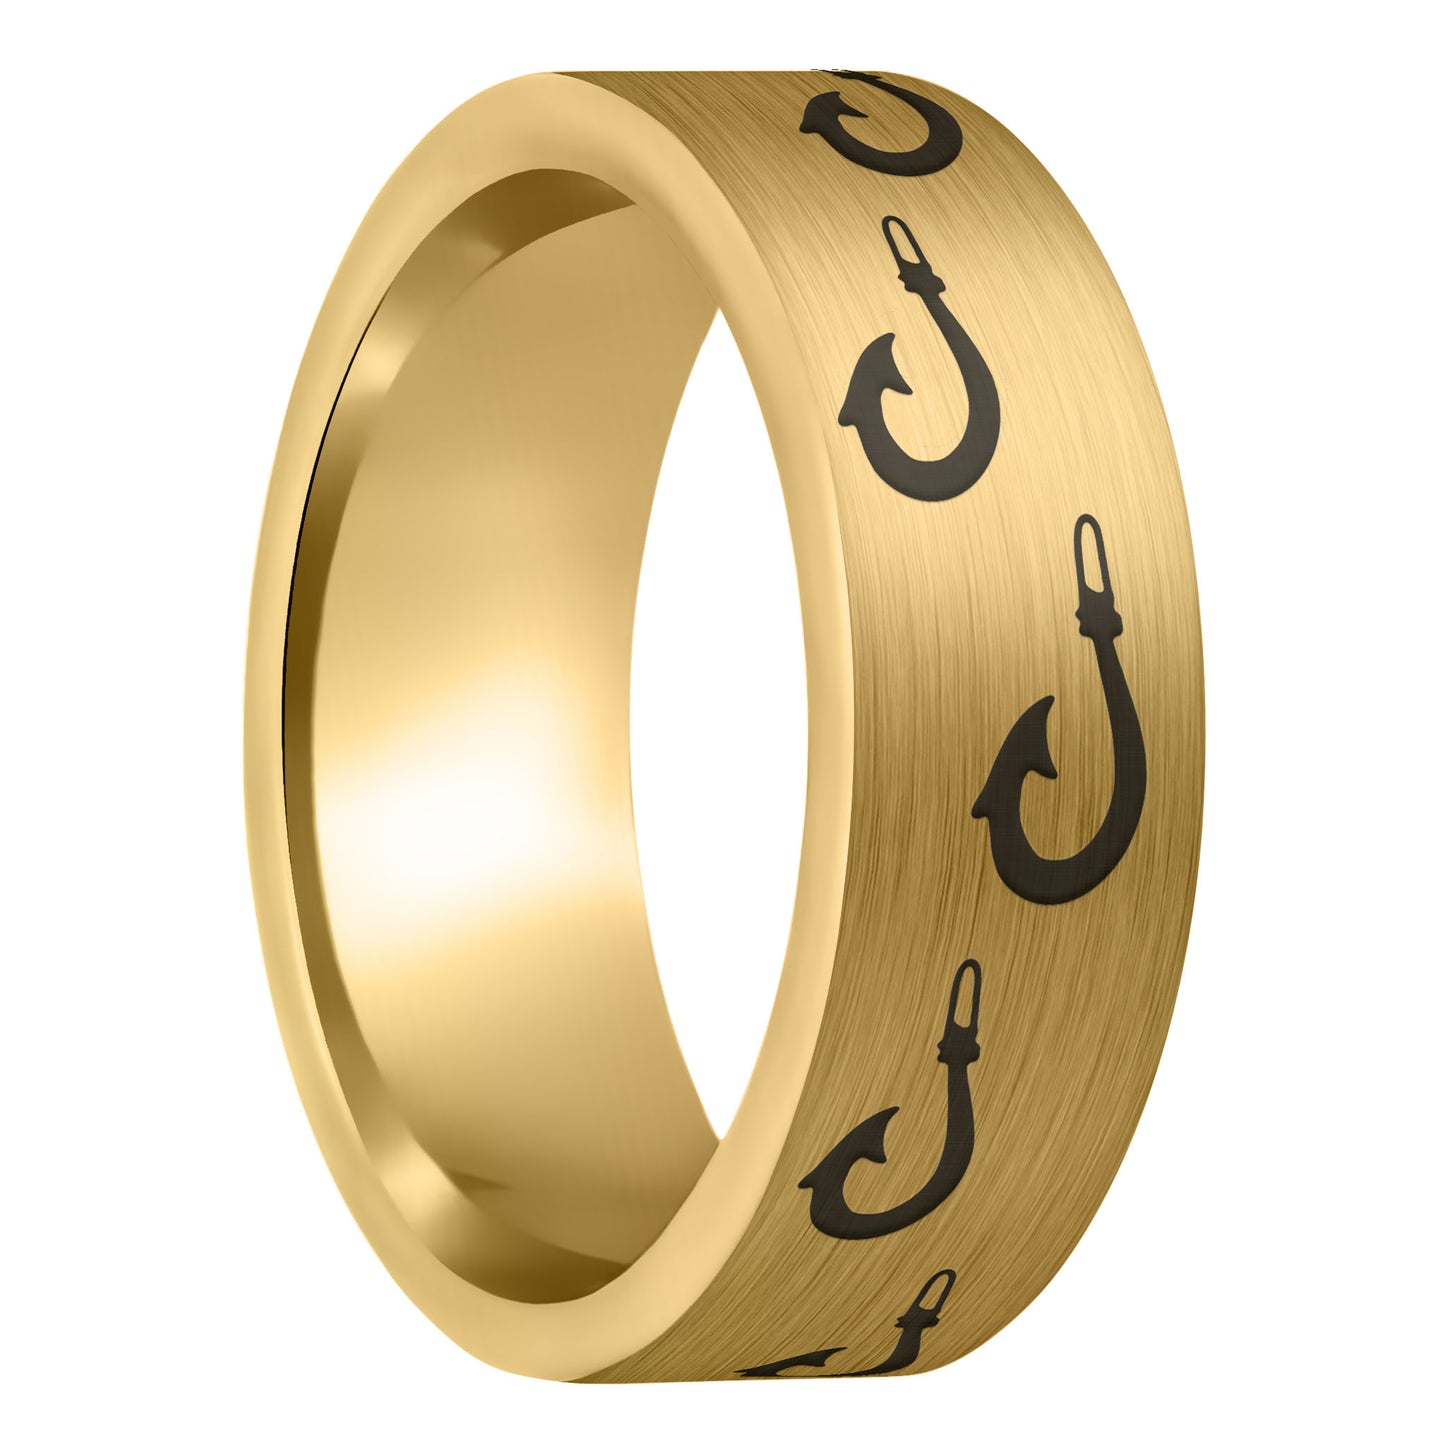 A polynesian fishing hook brushed gold tungsten men's wedding band displayed on a plain white background.